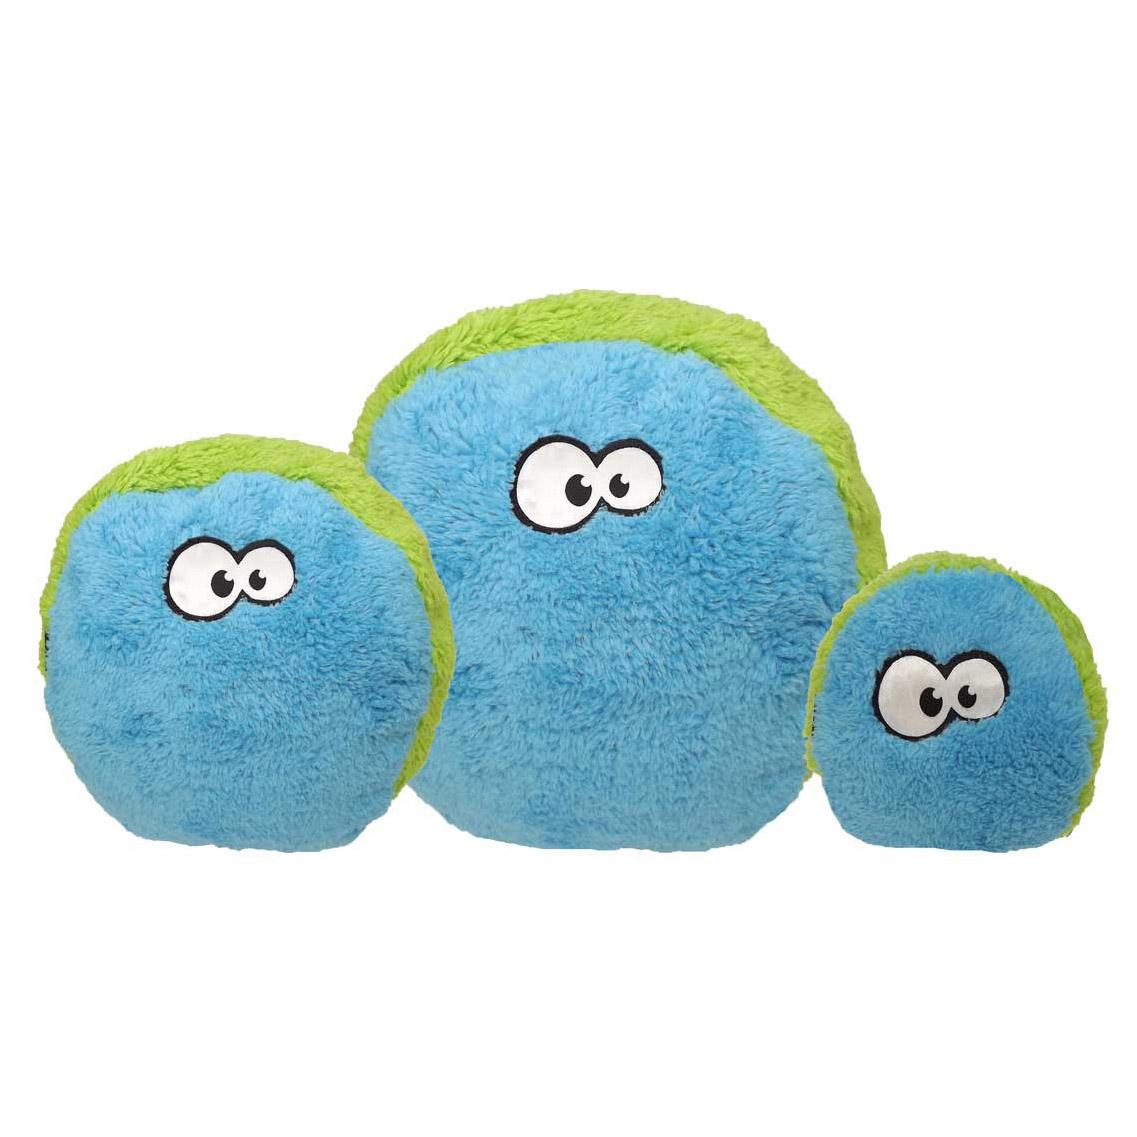 Cycle Dog Duraplush FuzzBall Dog Toy - Blue and Green